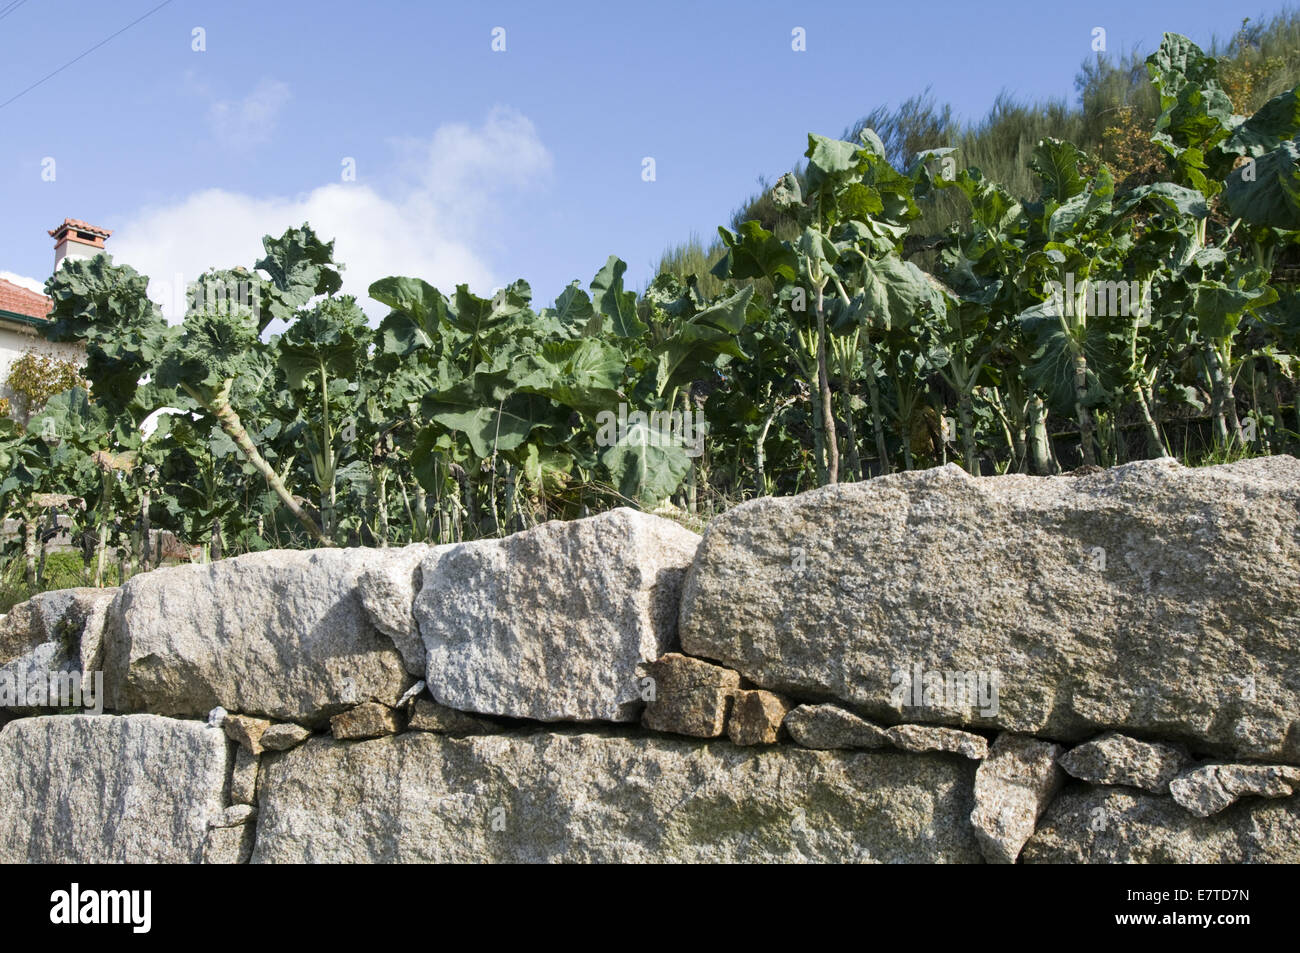 vegetables and a stone wall Stock Photo